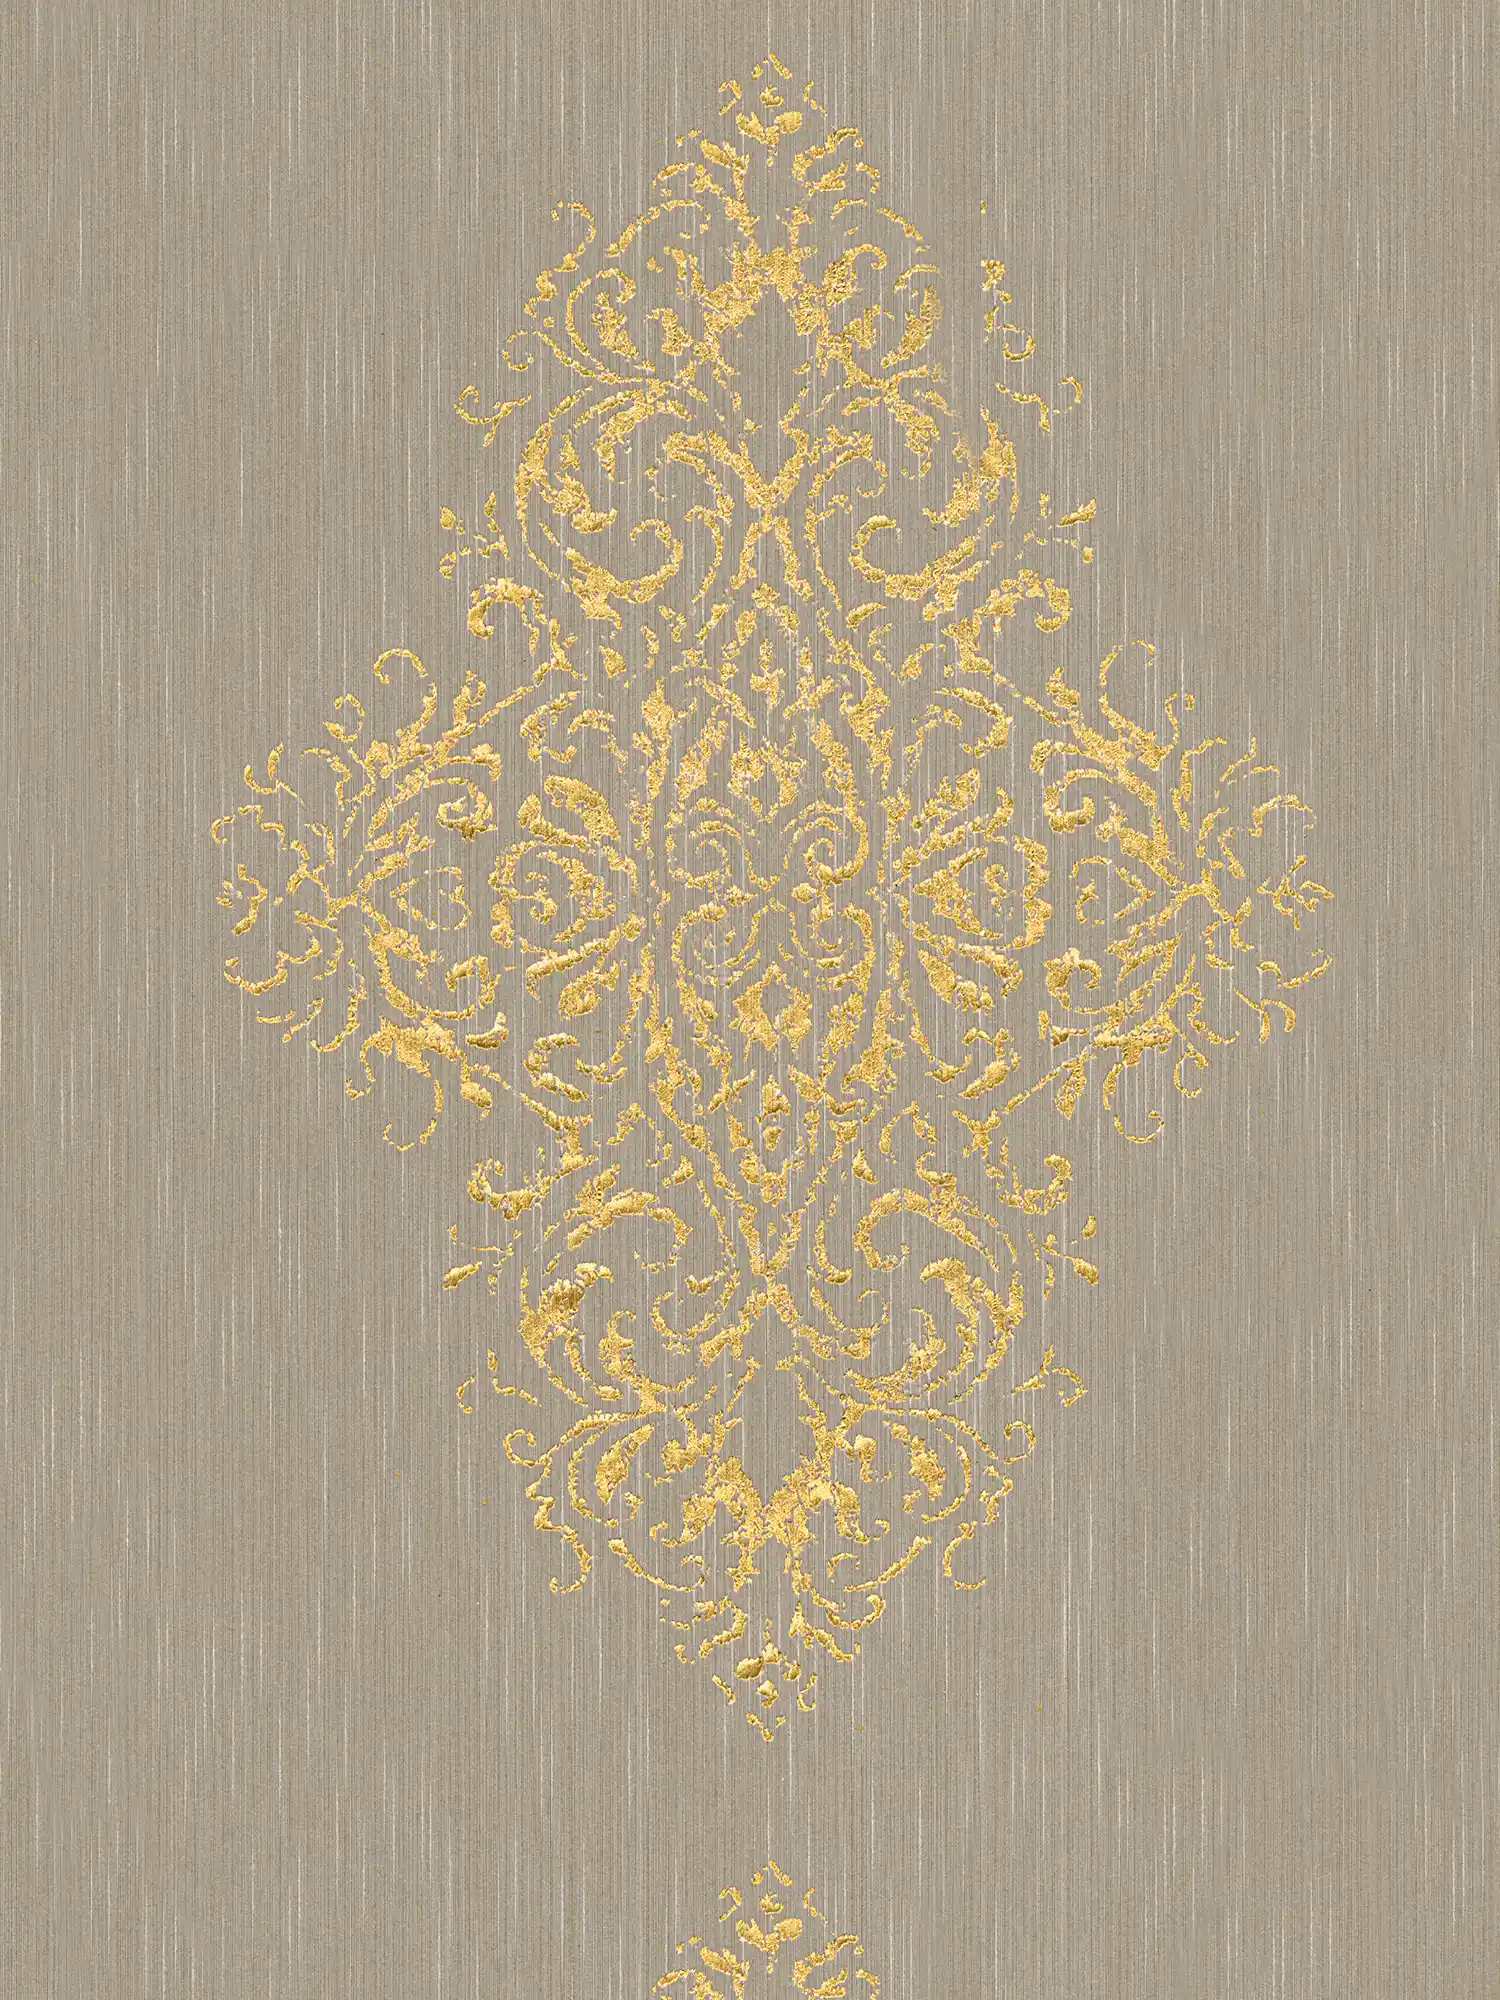 Ornament wallpaper with metallic effect in used look - beige, gold
